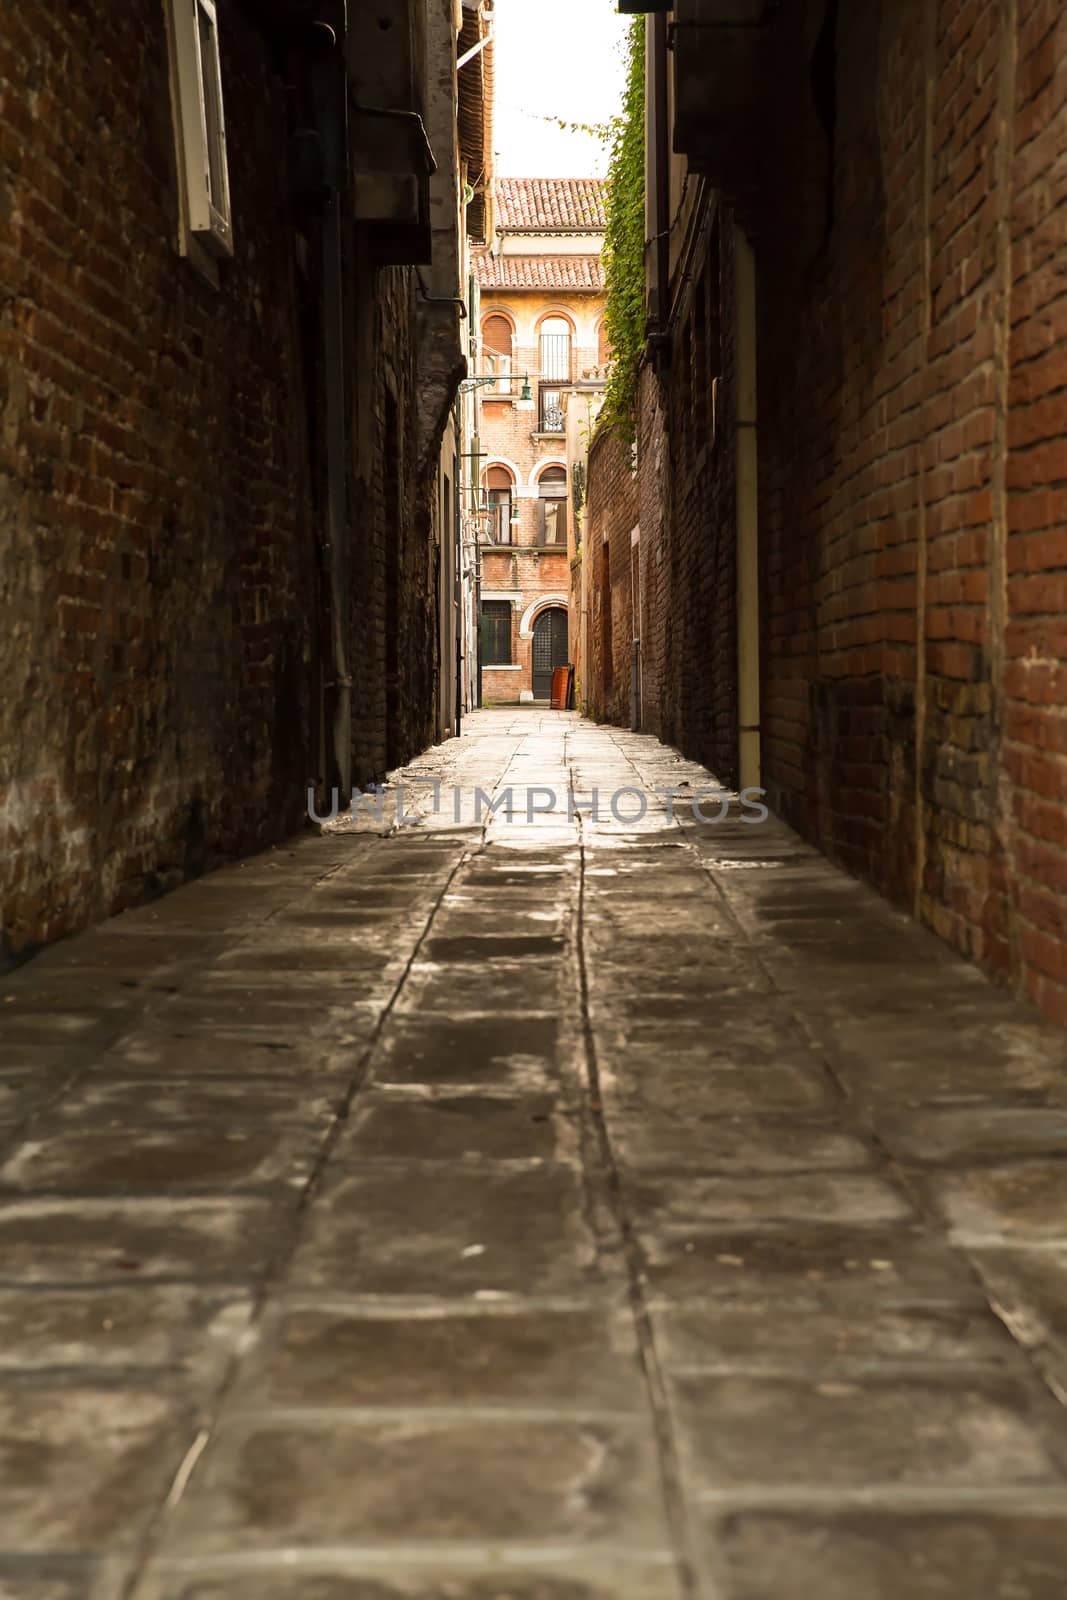 A sidestreet in Venice, Italy, Europe.